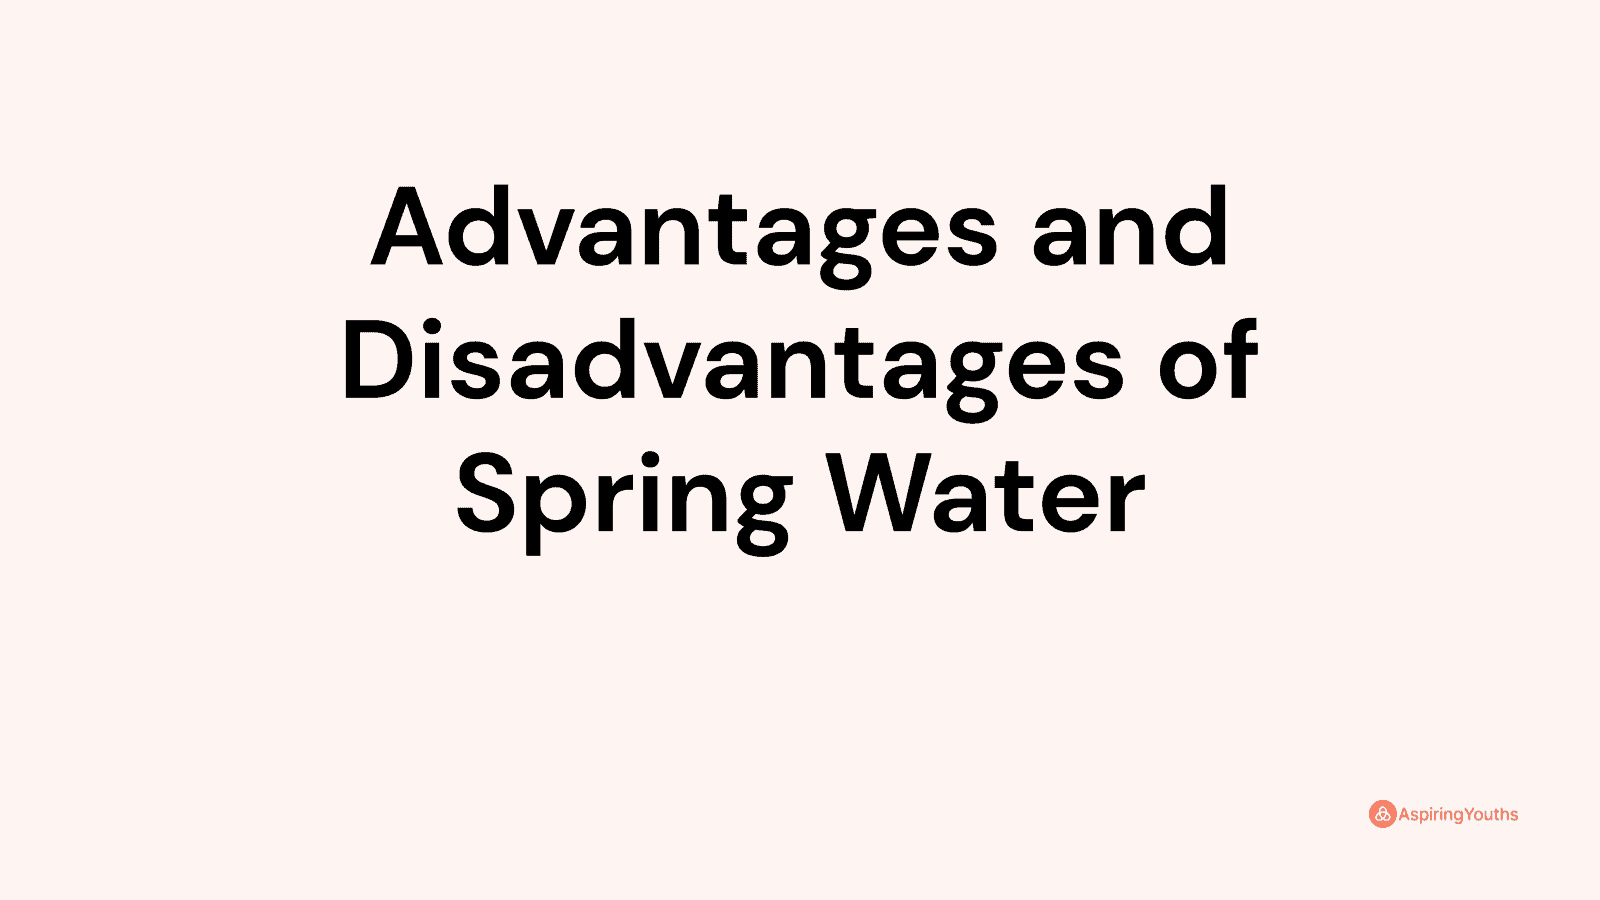 Advantages and disadvantages of Spring Water